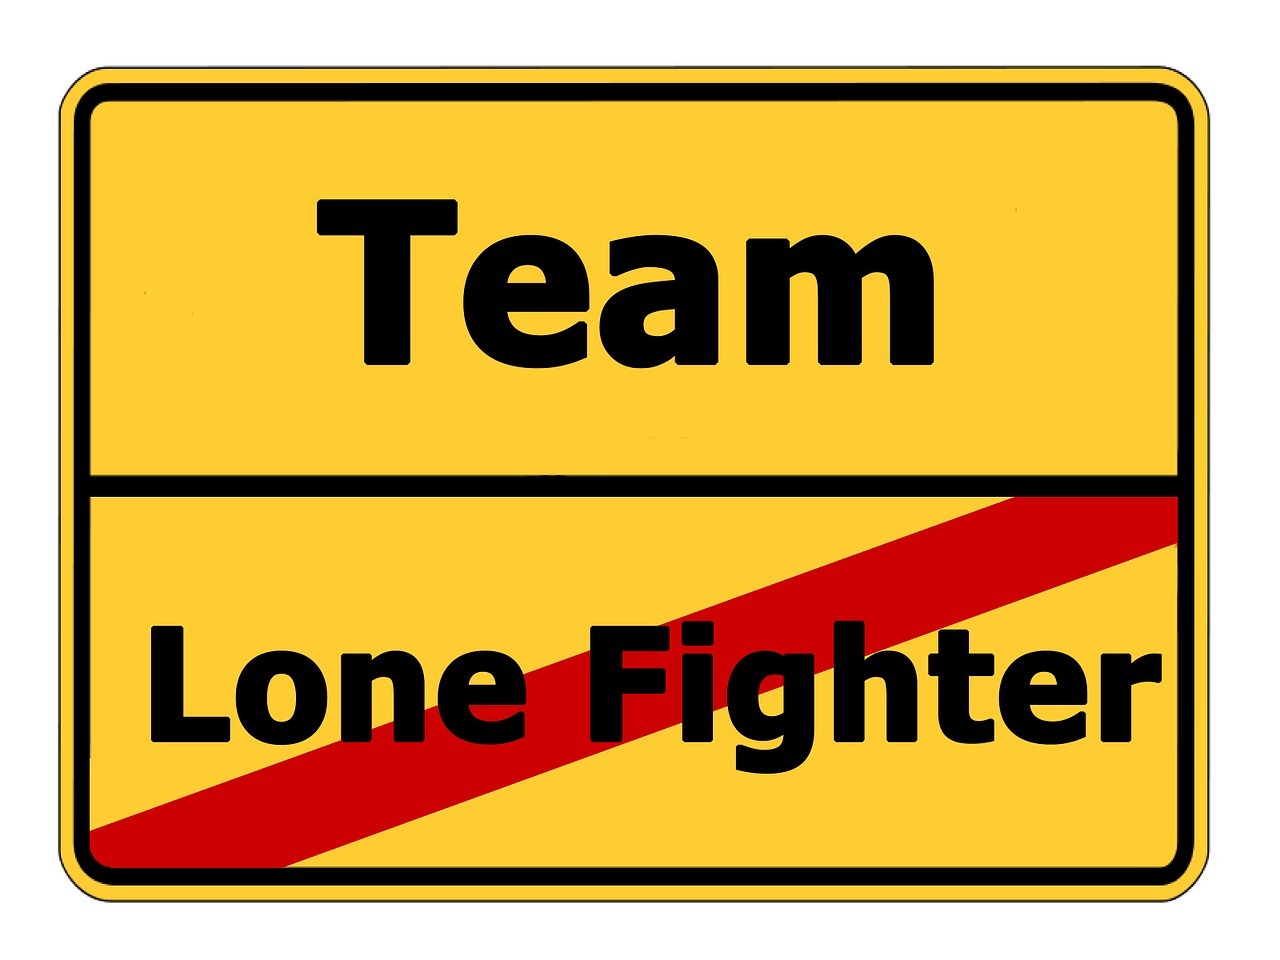 team lone town sign free photo